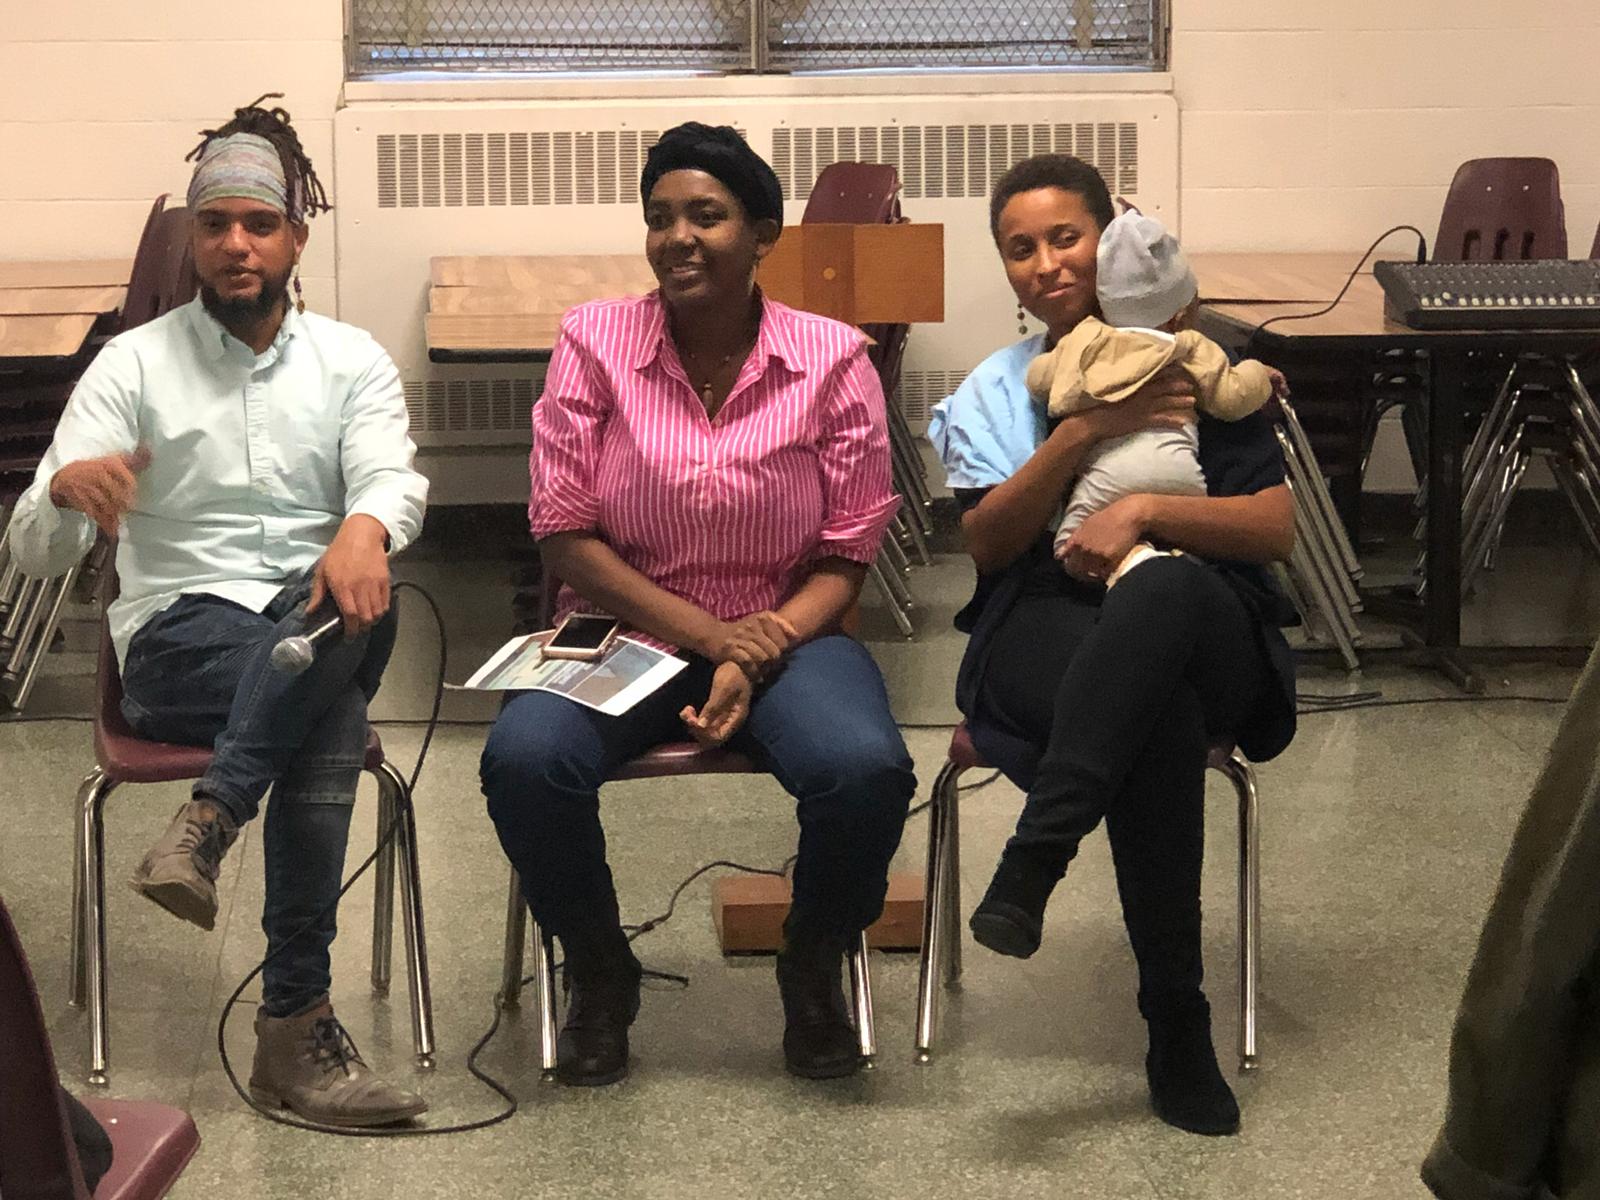 Alexis Francisco, Altagracia Jean Joseph, and Miriam Neptune seated in a row as they facilitate the conversation. Miriam is holding a baby.